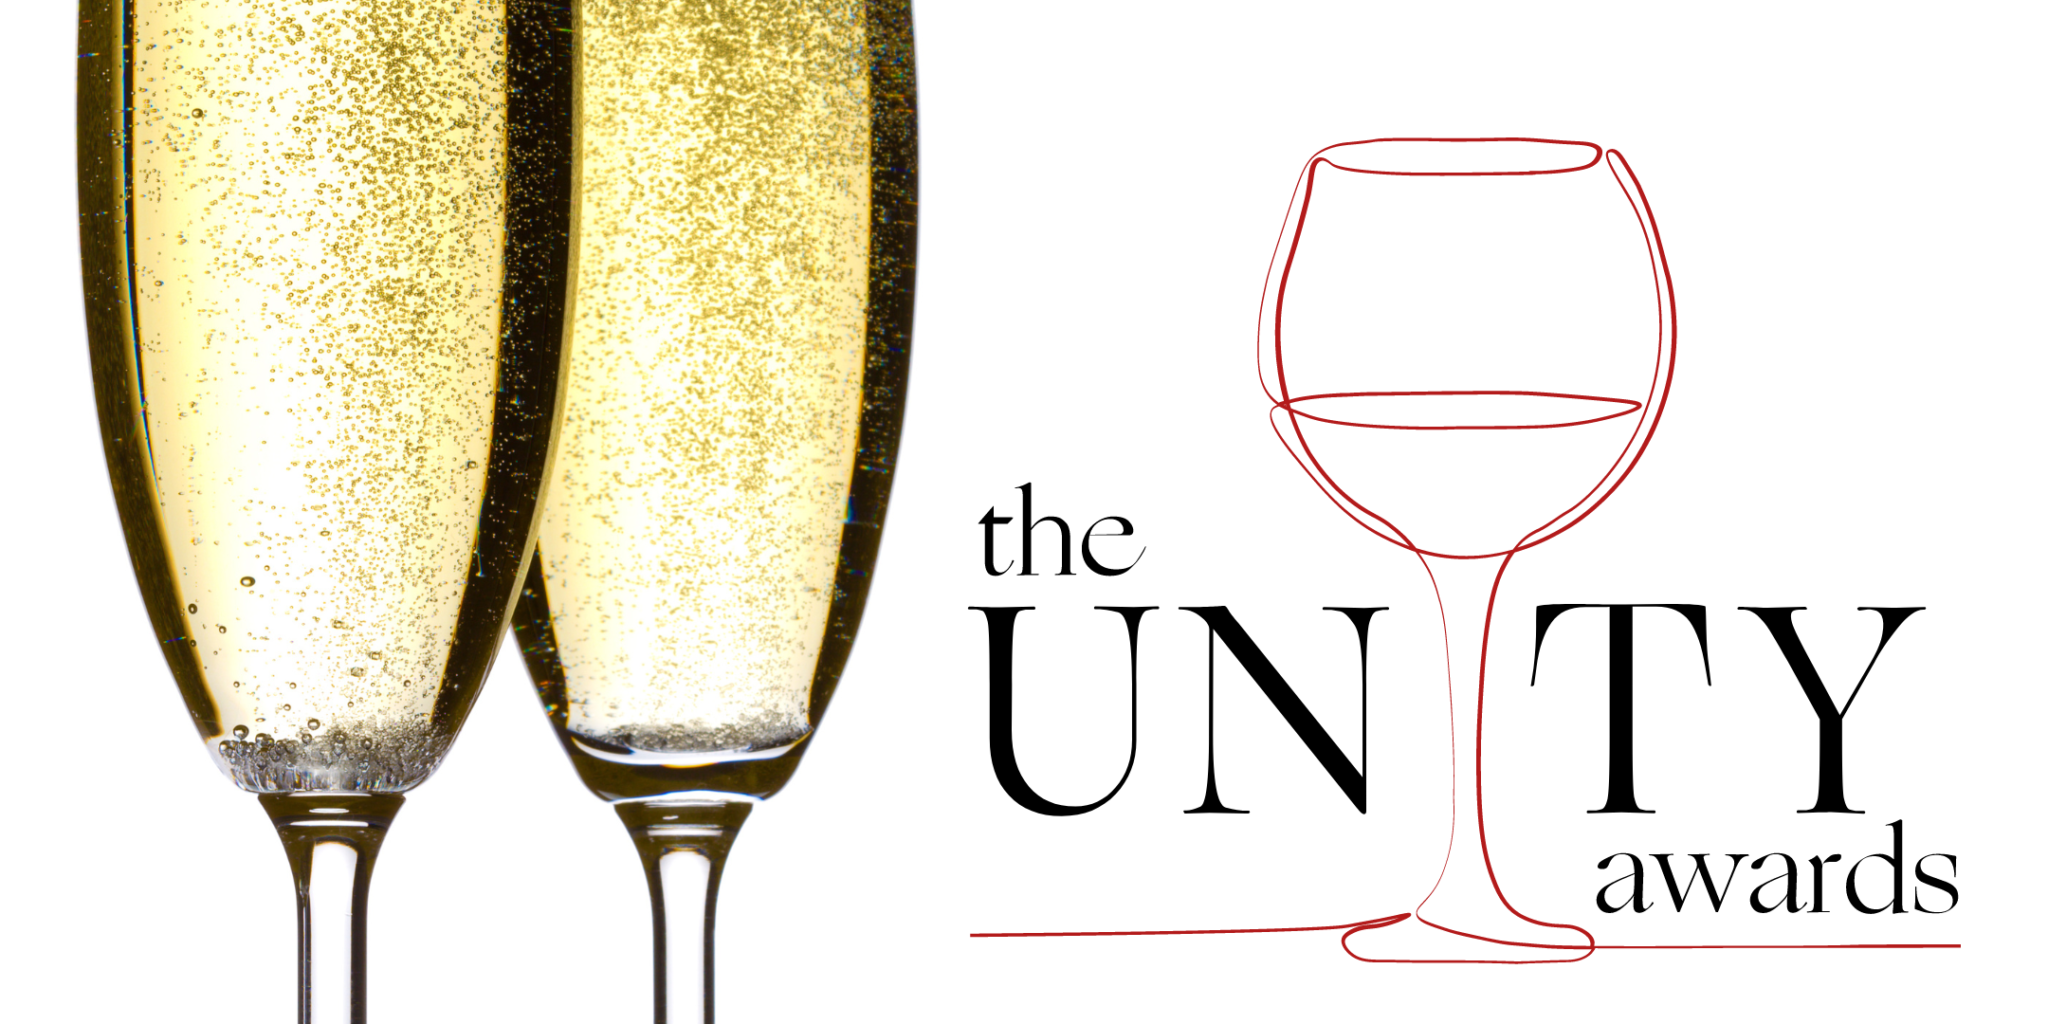 unity awards logo on white background with two glasses of sparkling white wine